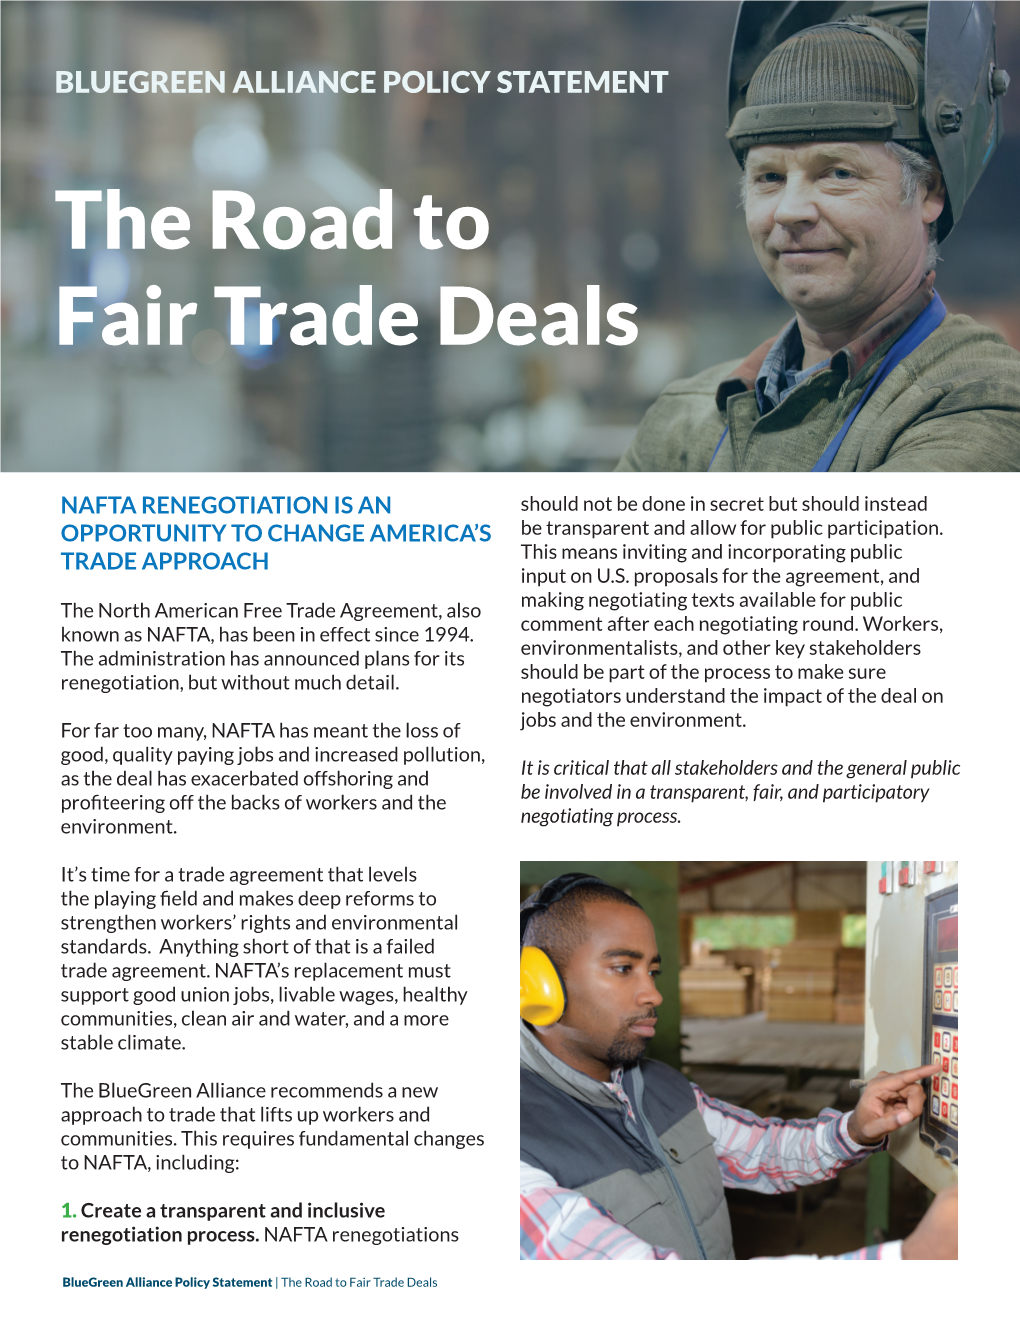 The Road to Fair Trade Deals